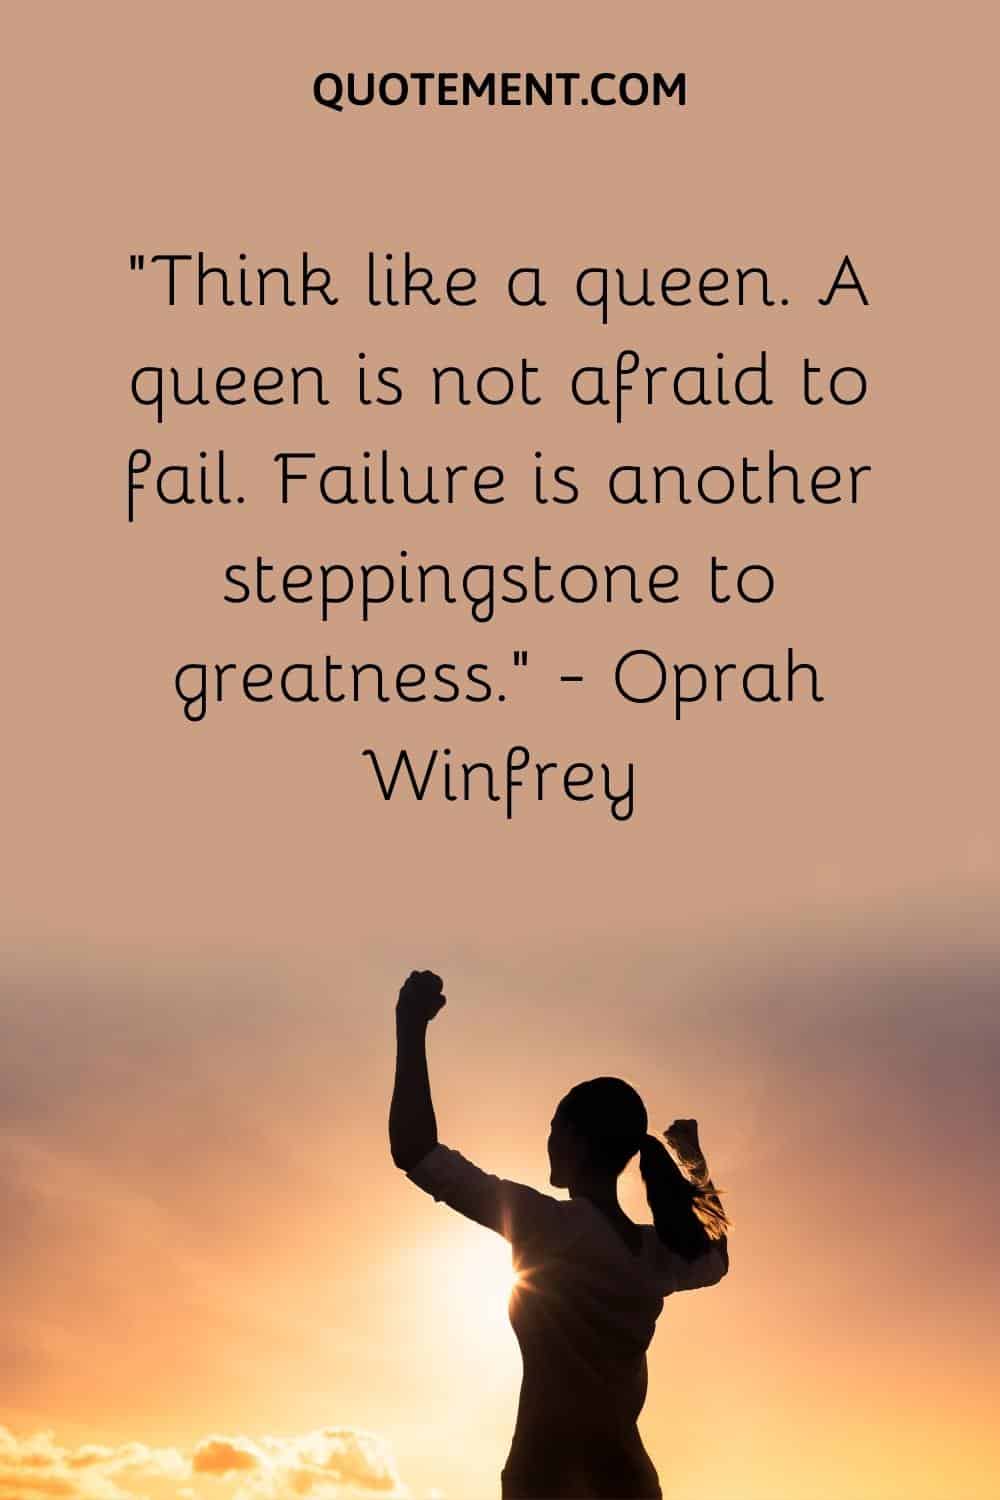 Think like a queen. A queen is not afraid to fail. Failure is another steppingstone to greatness